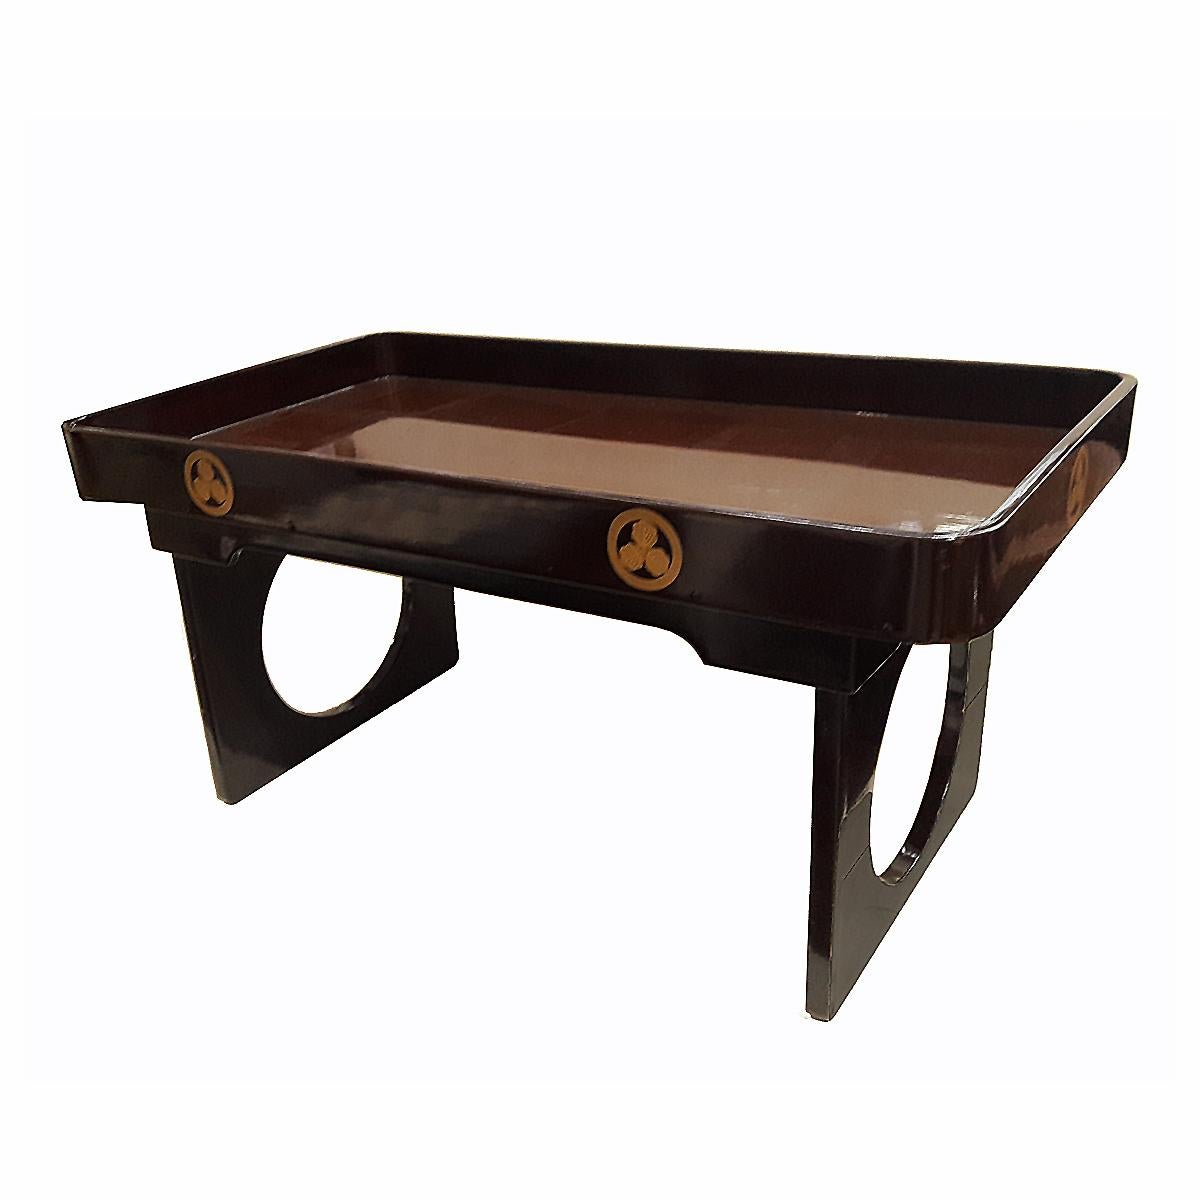 A charming and elegant folding tray table. Japan, early Showa period, circa 1940. 
Made out of wood, smoothly lacquered in brown color with golden accents, and a crafty folding mechanism that reflects the exquisite art of Asian wood joinery.